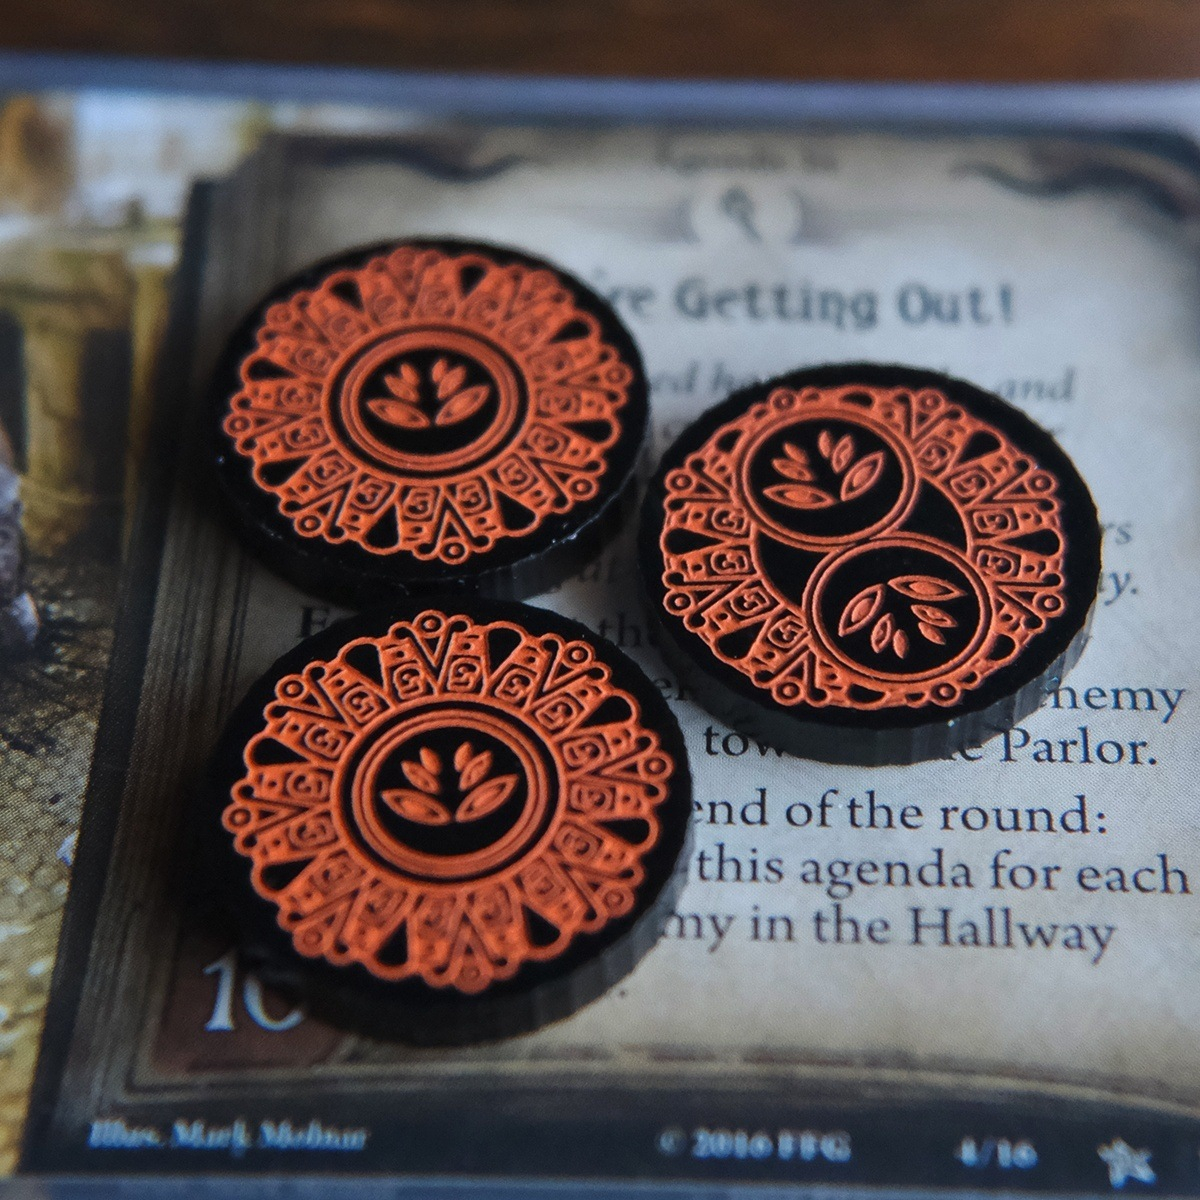 Two one-value and one two-value Forgotten Limited Edition Doom tokens on top of the Arkham Horror LCG Agenda, We’re Getting Out!